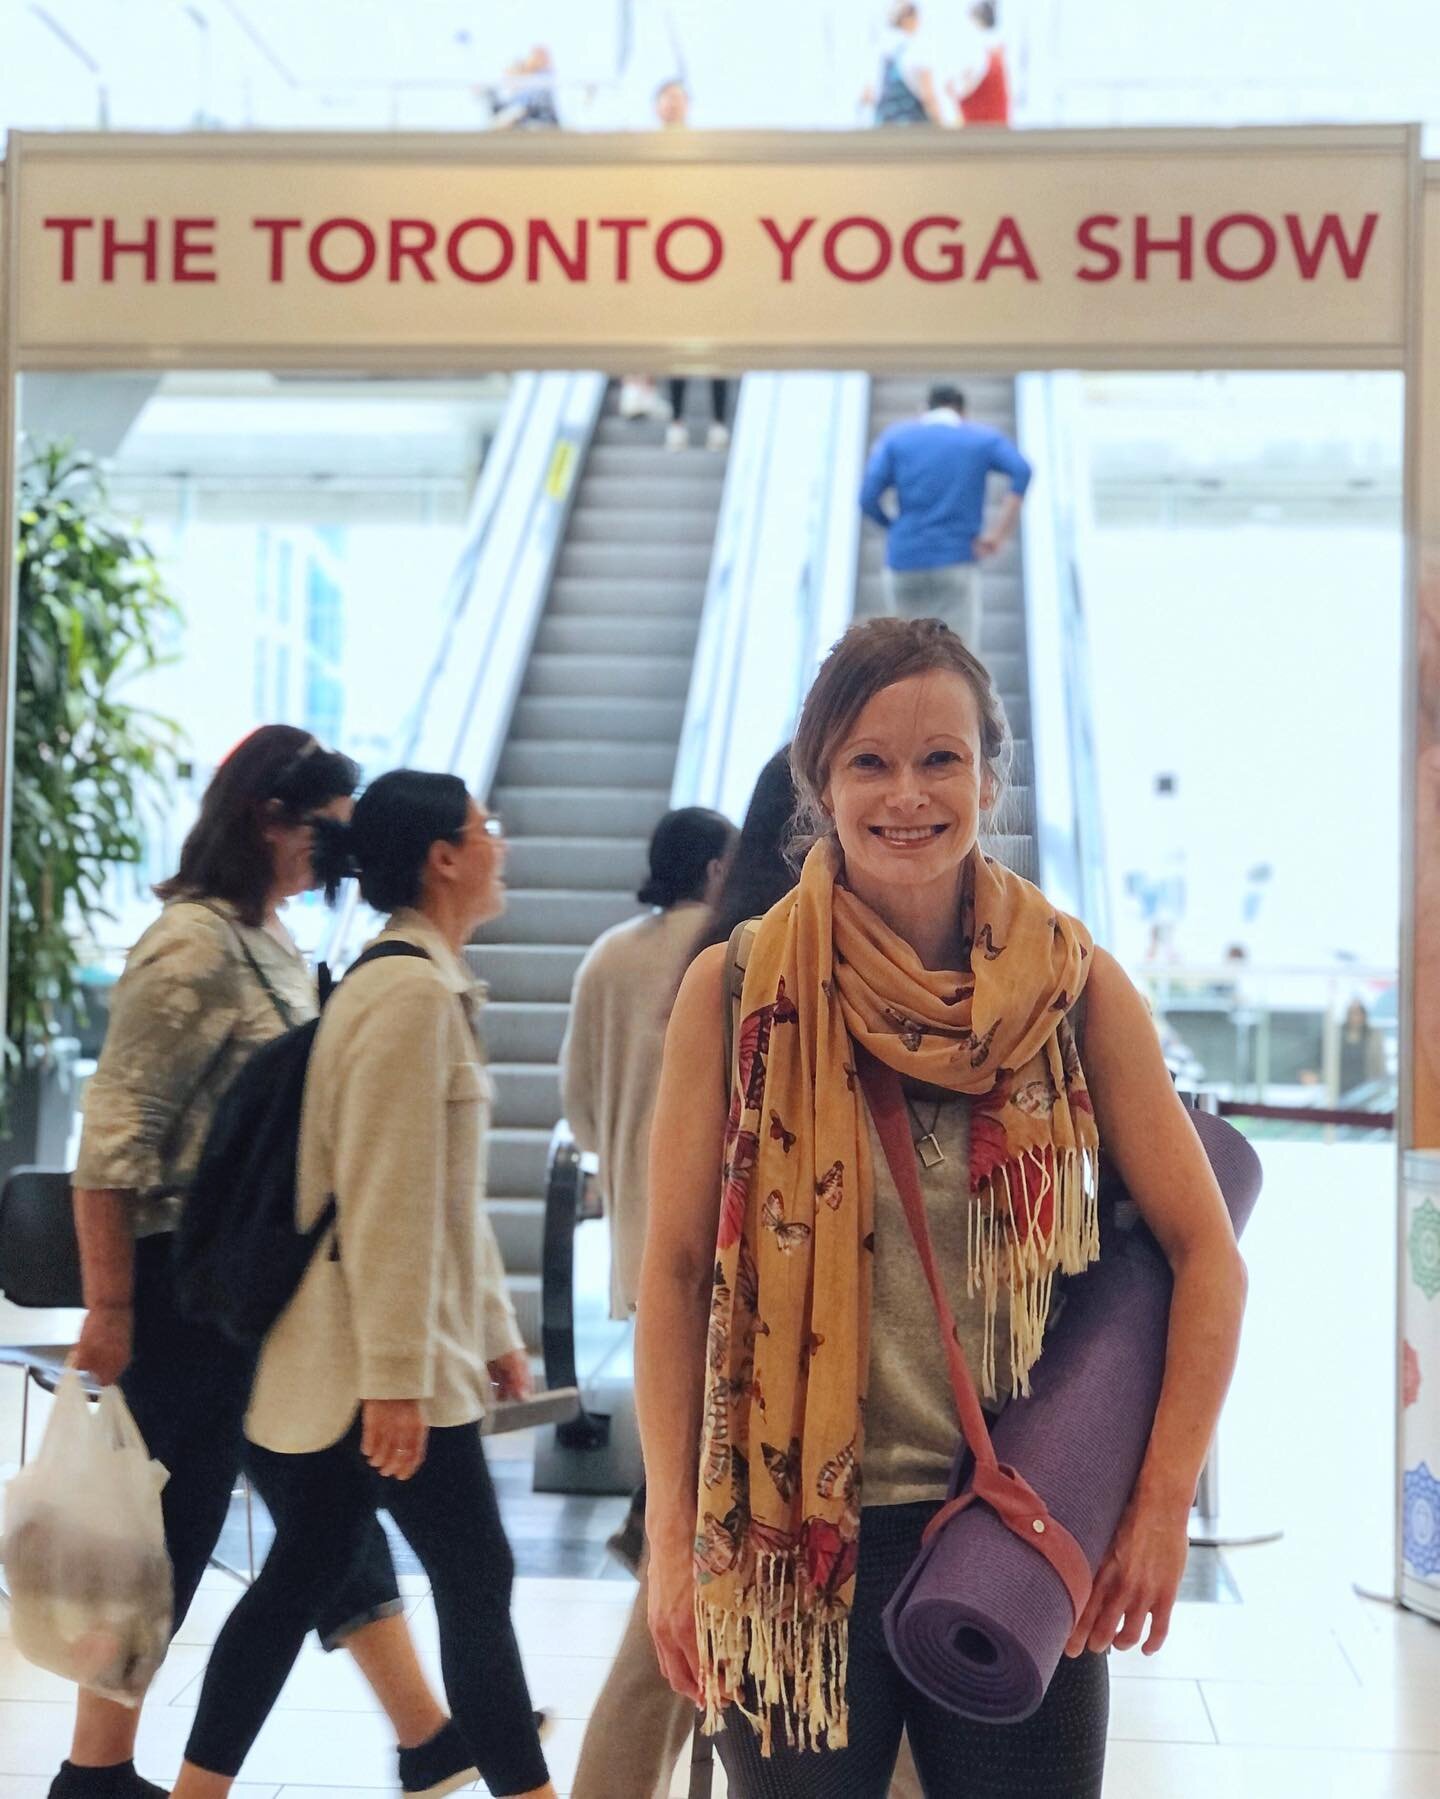 Great to be back at the Toronto Yoga Conference &amp; Show&hellip; first event in 4 years! 

It is always wonderful to share the benefits of mind-body practices for mental health &amp; addiction recovery, as well as teach trauma-informed yoga &amp; m